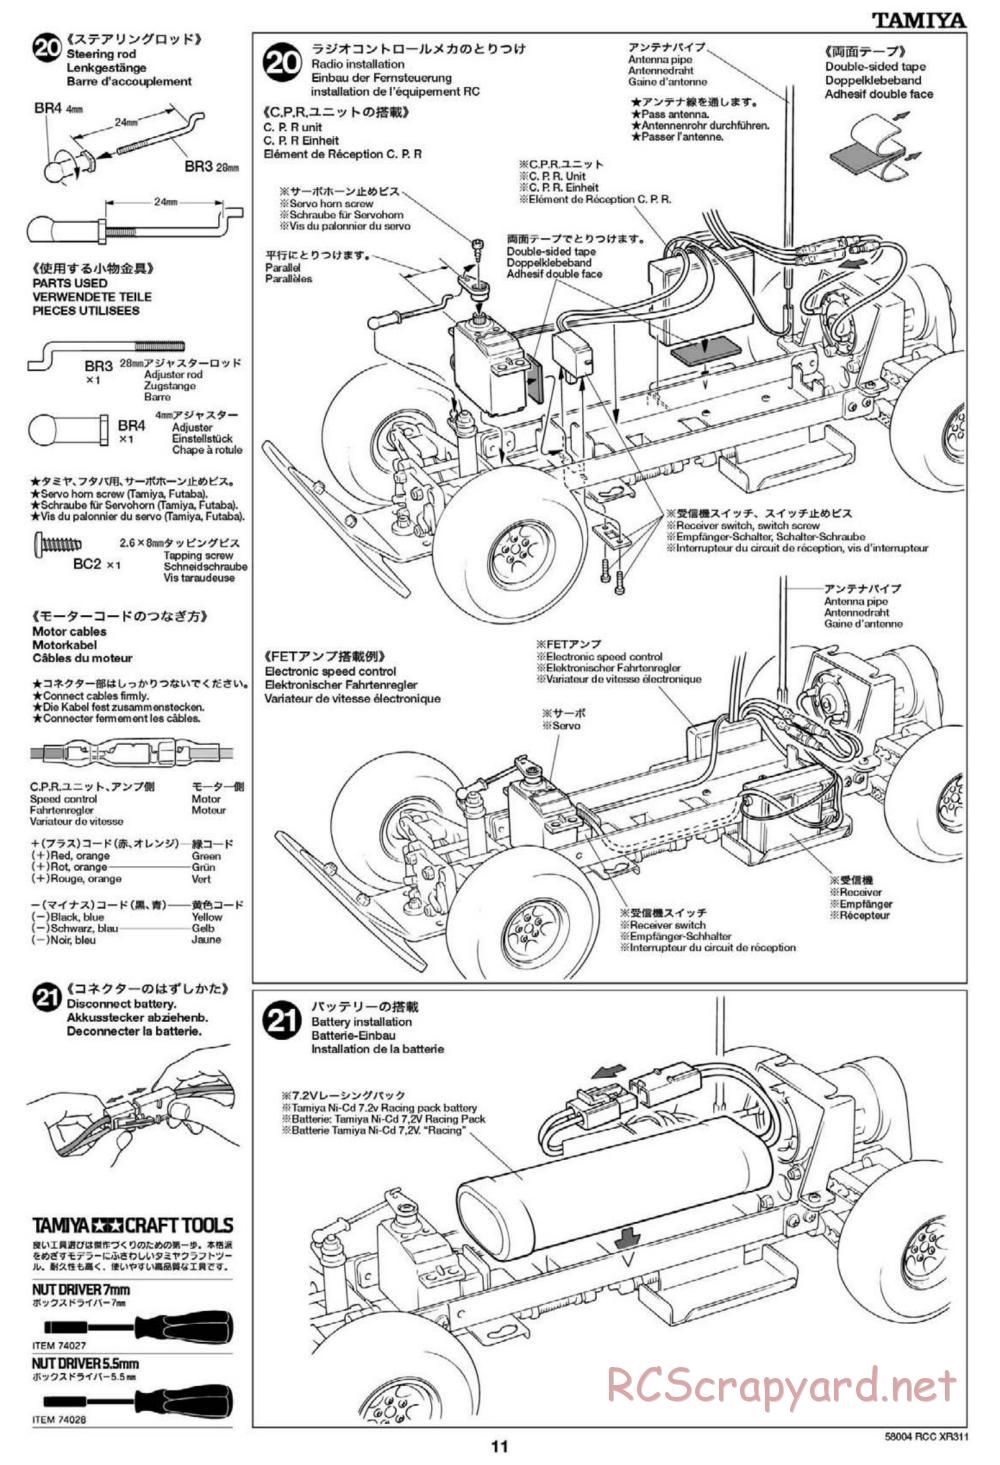 Tamiya - XR311 Combat Support Vehicle (2012) Chassis - Manual - Page 11